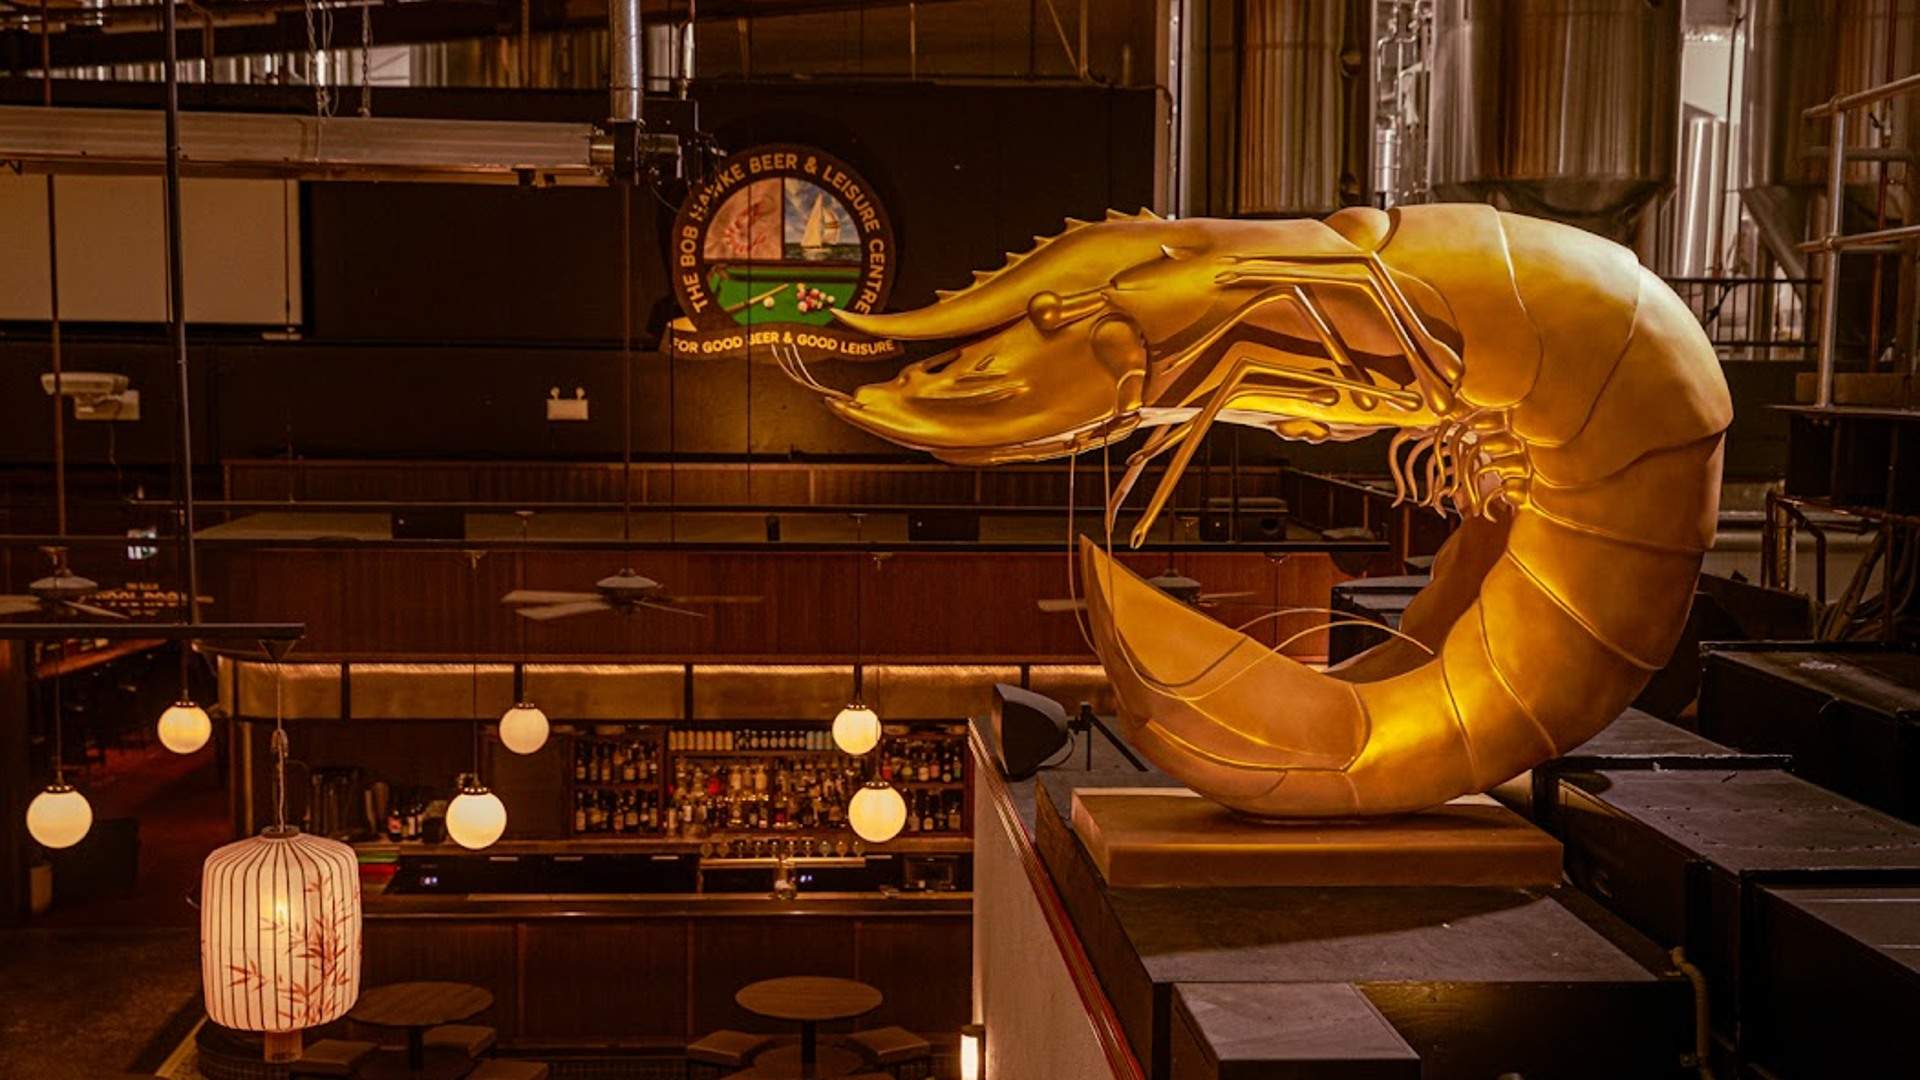 Hawke's Has Unveiled Shane Prawn, a 120-Kilogram Golden Prawn Towering Over Its Marrickville Brewery